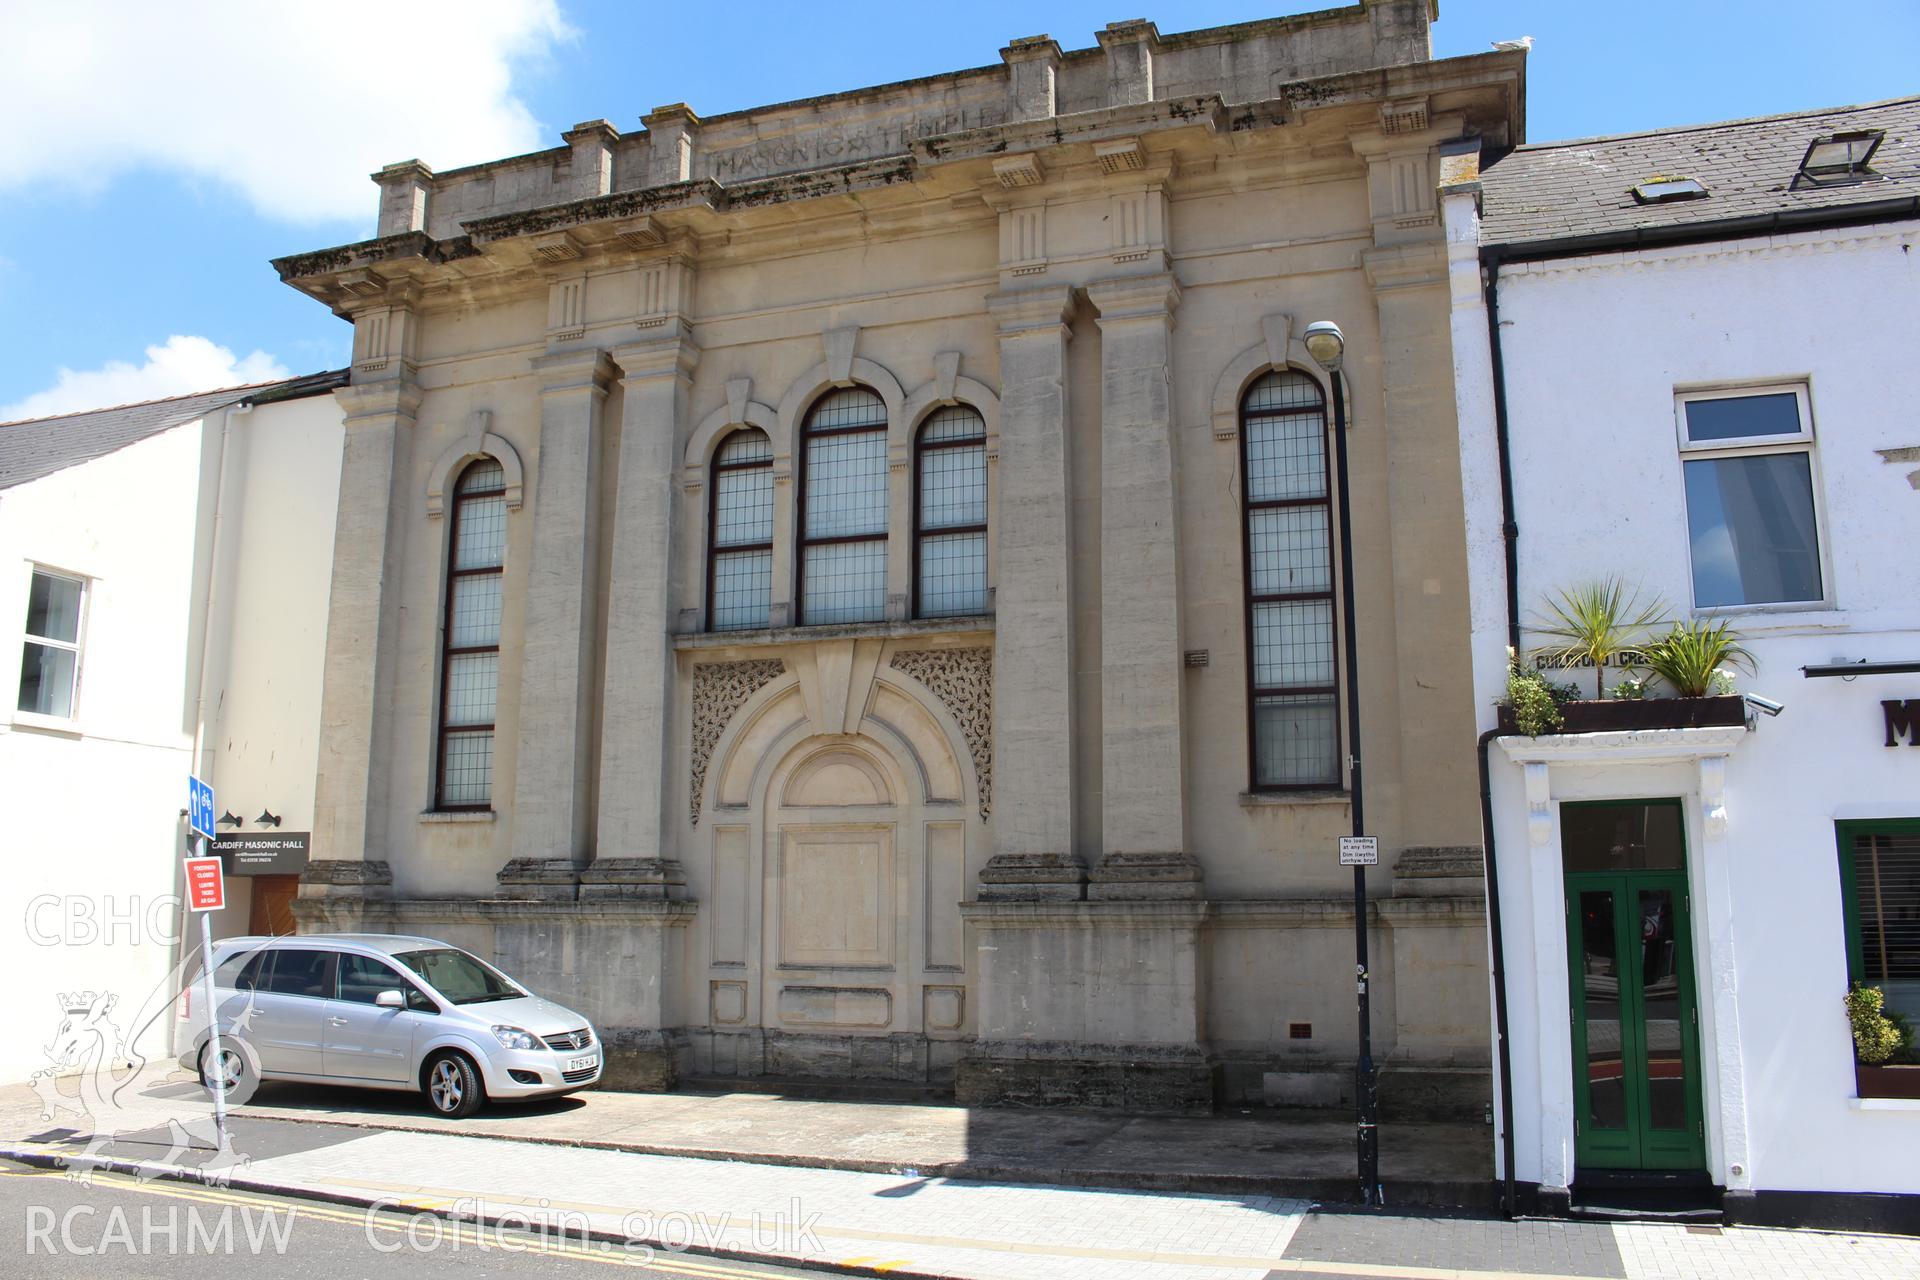 Exterior view of front elevation of the former United Free Methodist Church, now a Masonic Temple, in Cardiff. Photograph taken during survey conducted by Sue Fielding of the RCAHMW, 11th March 2019.